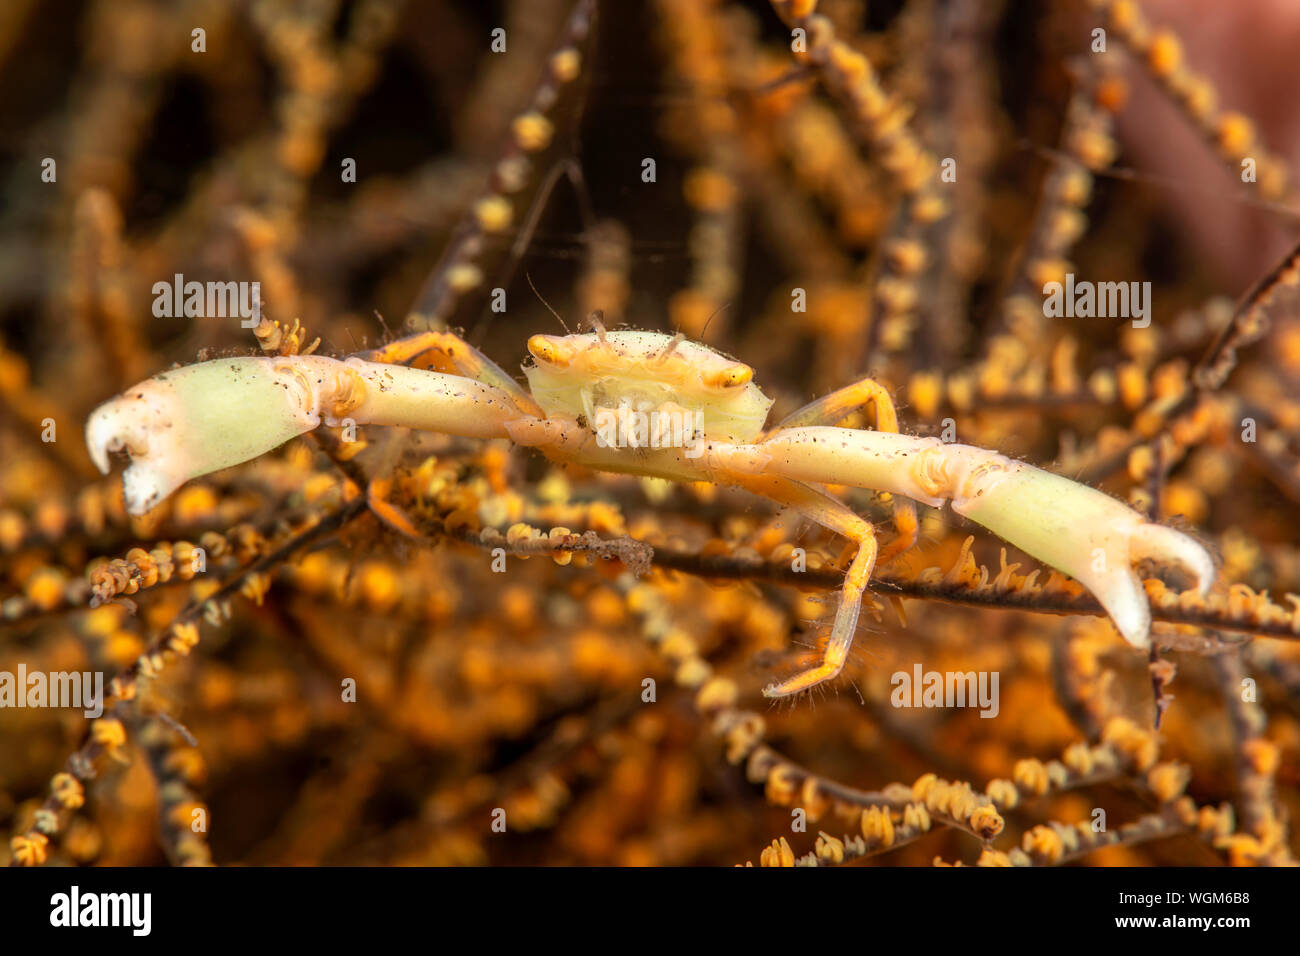 A crowned coral crab with large pincers rests in some gorgonian coral Stock Photo